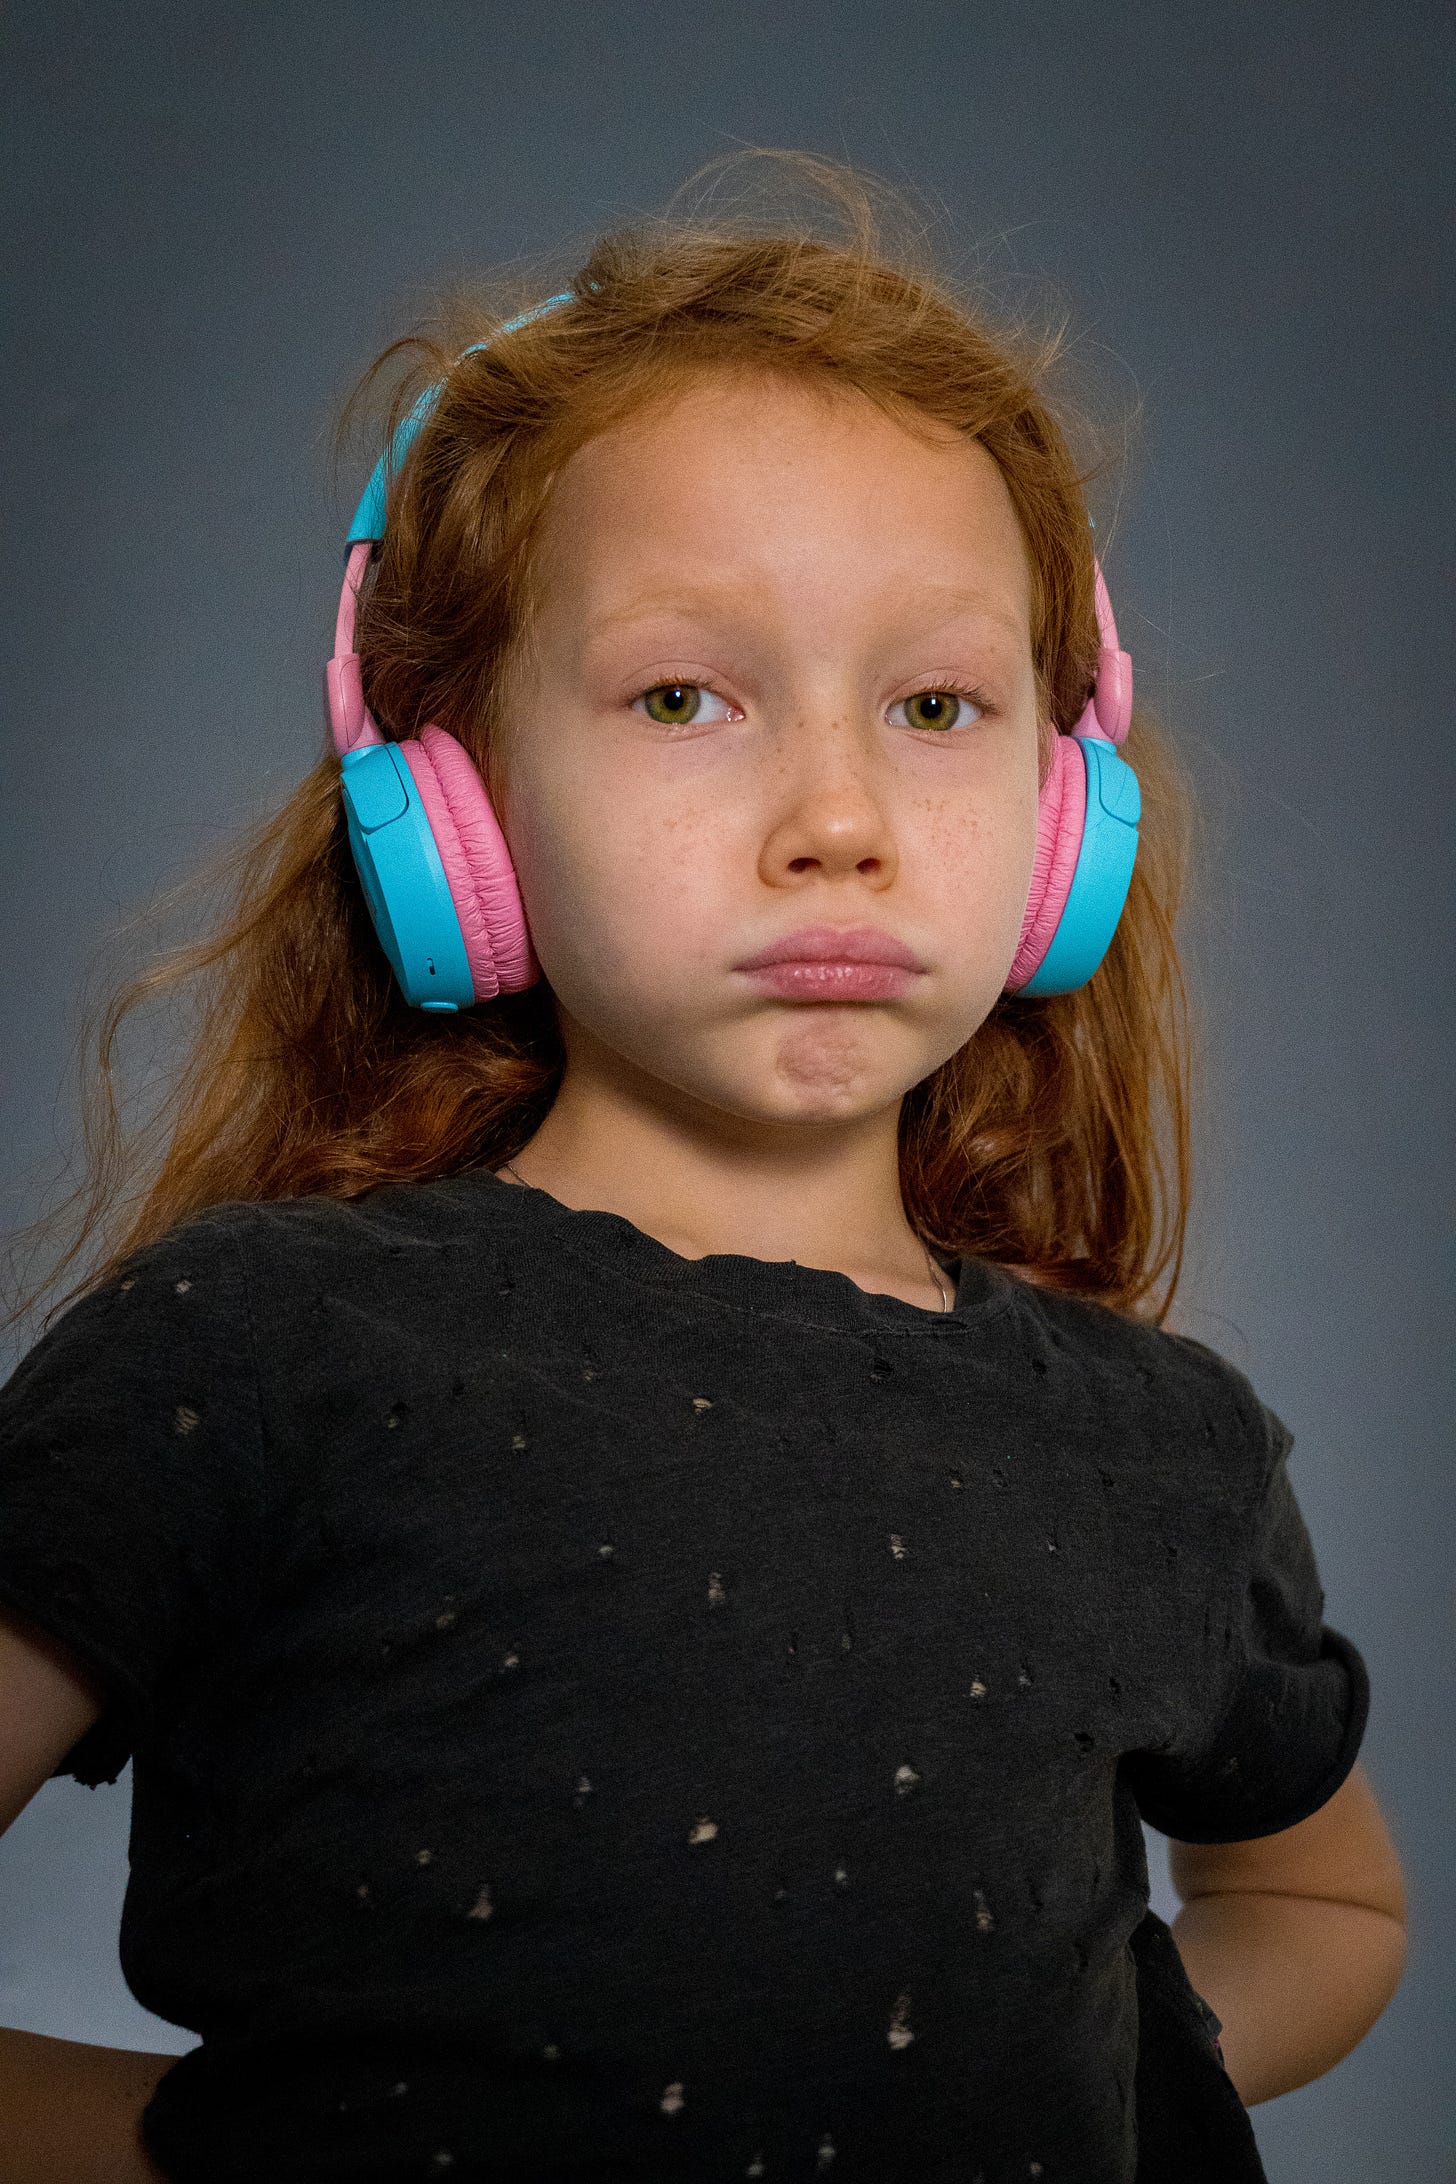  a red haired girl is reading a black shirt and bright pink and blue headphones. She is blowing her cheeks out in disapproval. Her hands are on her hips.